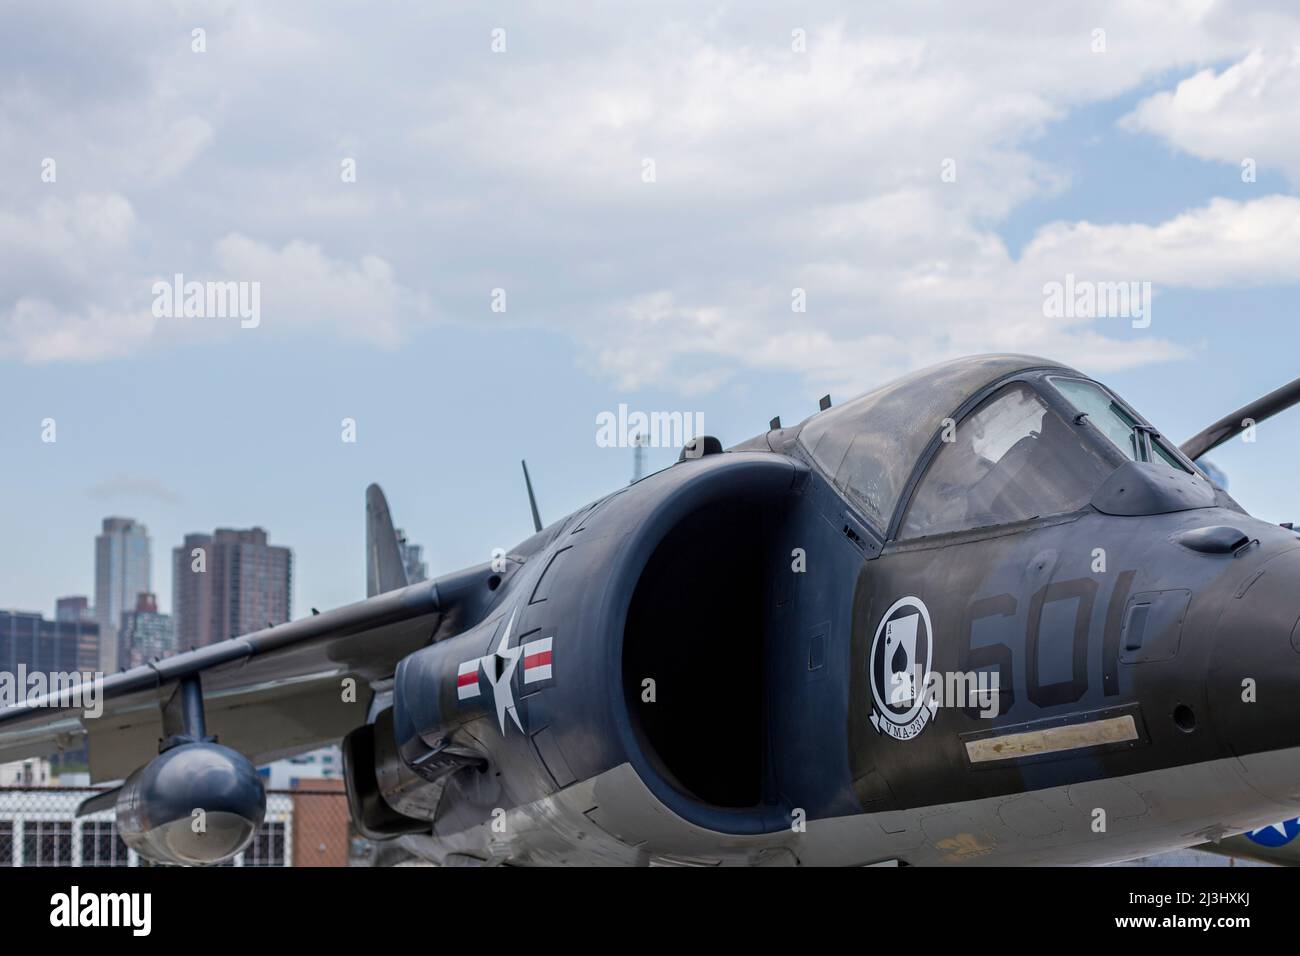 12 AV/W 46 ST, New York City, NY, USA, British Aerospace AV-8C Harrier at the Intrepid Sea, Air & Space Museum - an american military and maritime history museum showcases the aircraft carrier USS Intrepid. Stock Photo